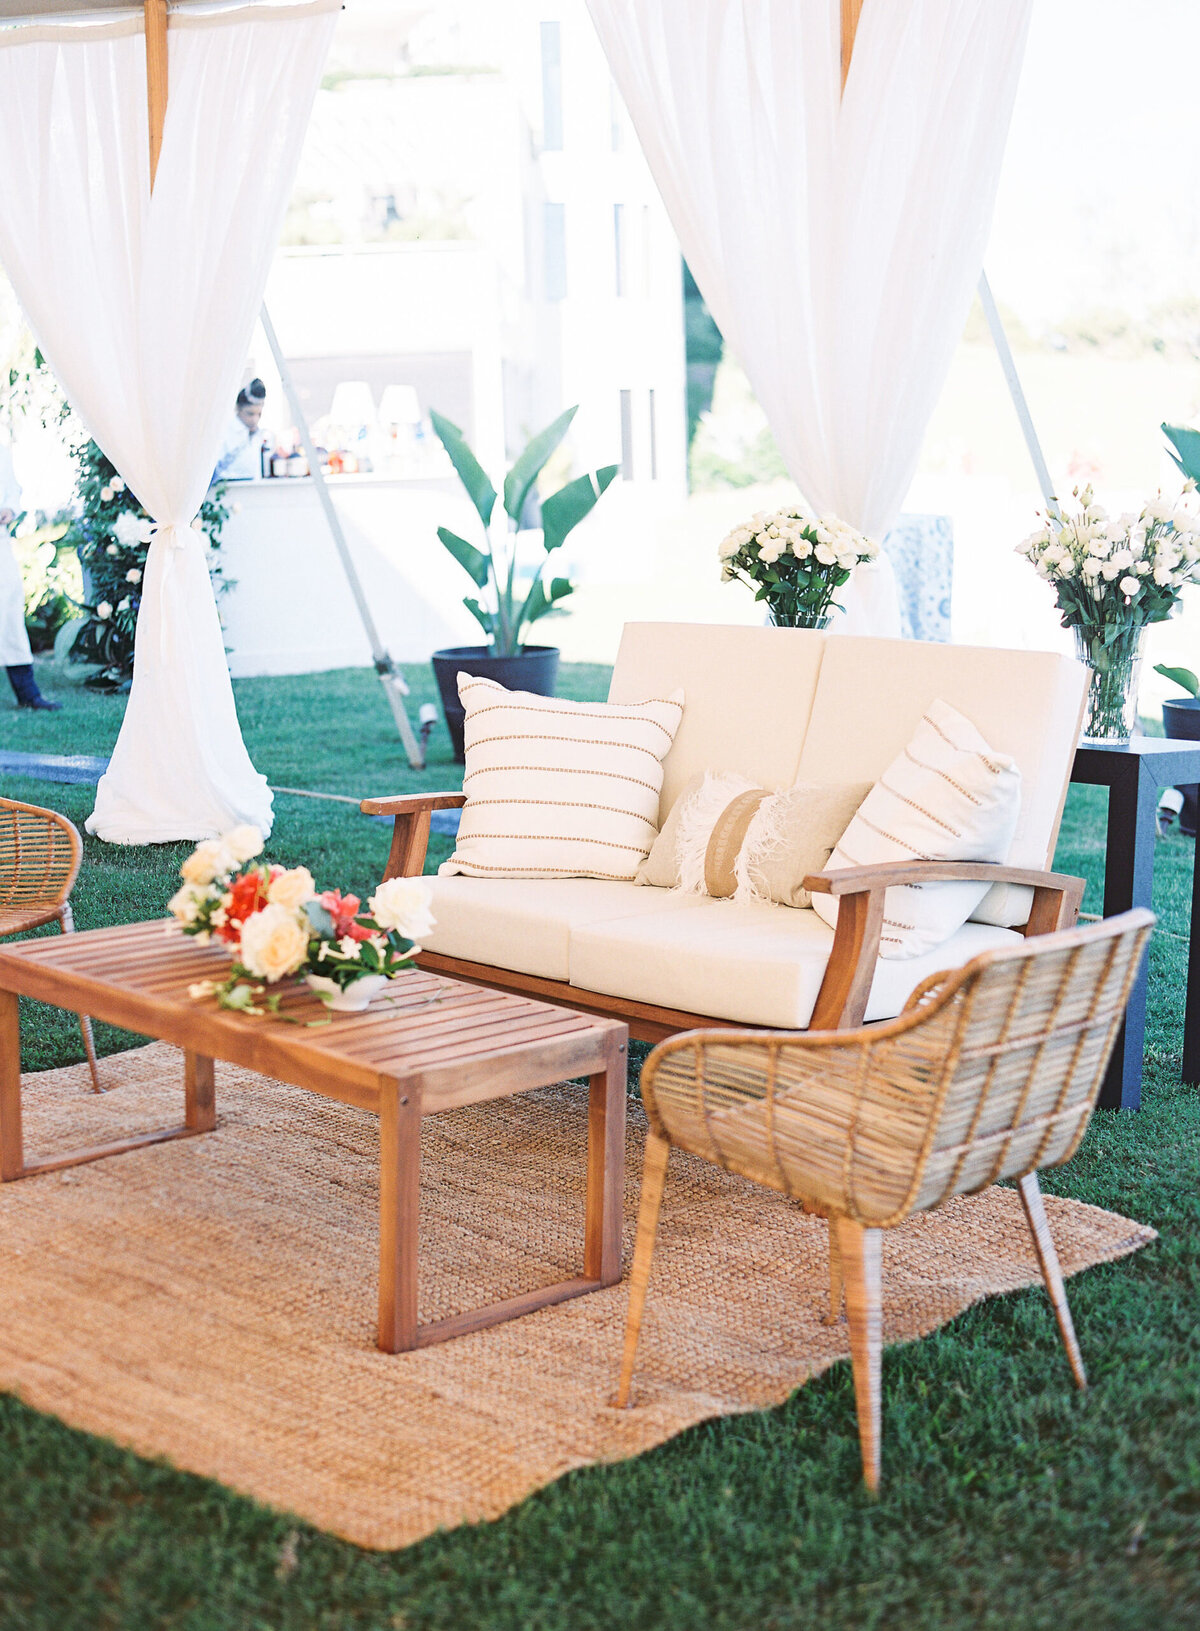 Wicker Lounge Furniture Rentals - Weddings and Events - Big Fish Events